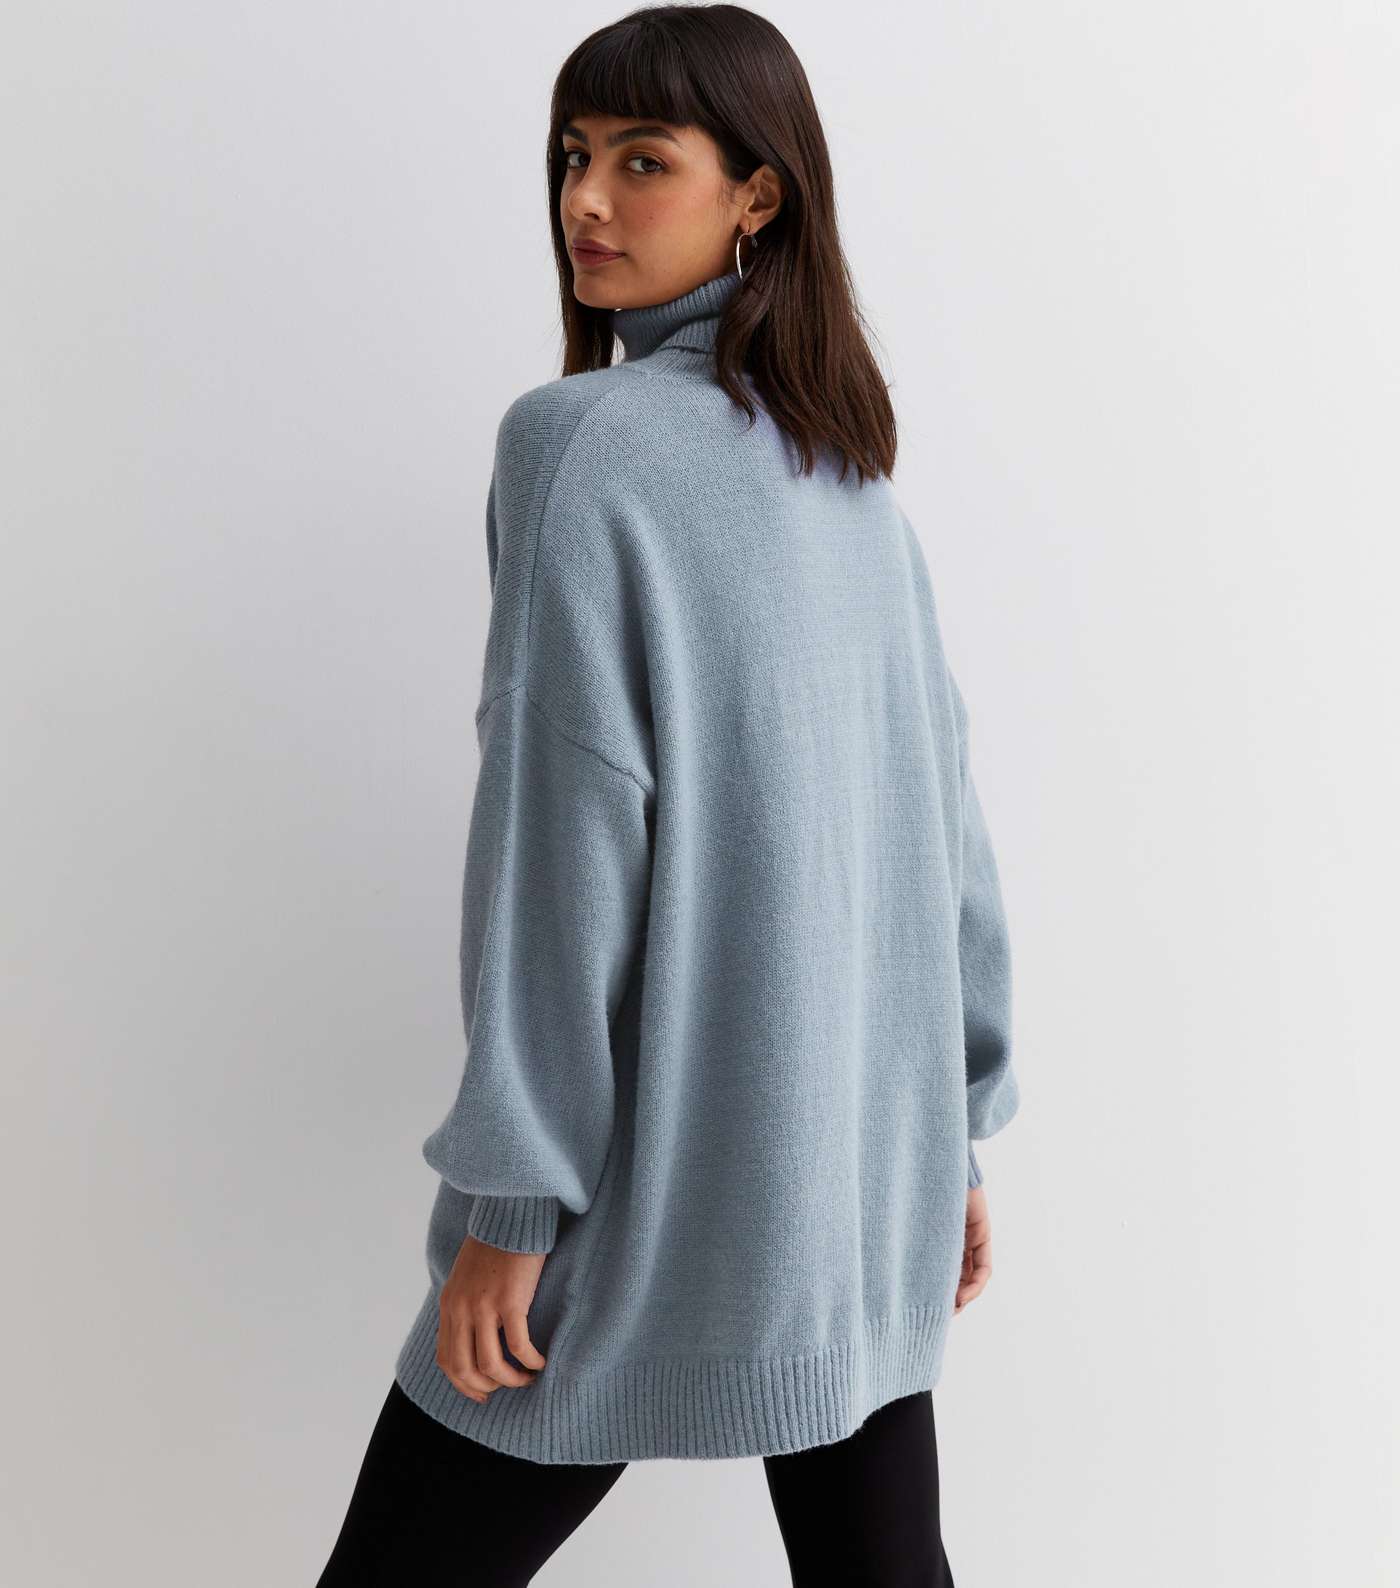 Gini London Pale Grey Knit Roll Neck Jumper Image 4